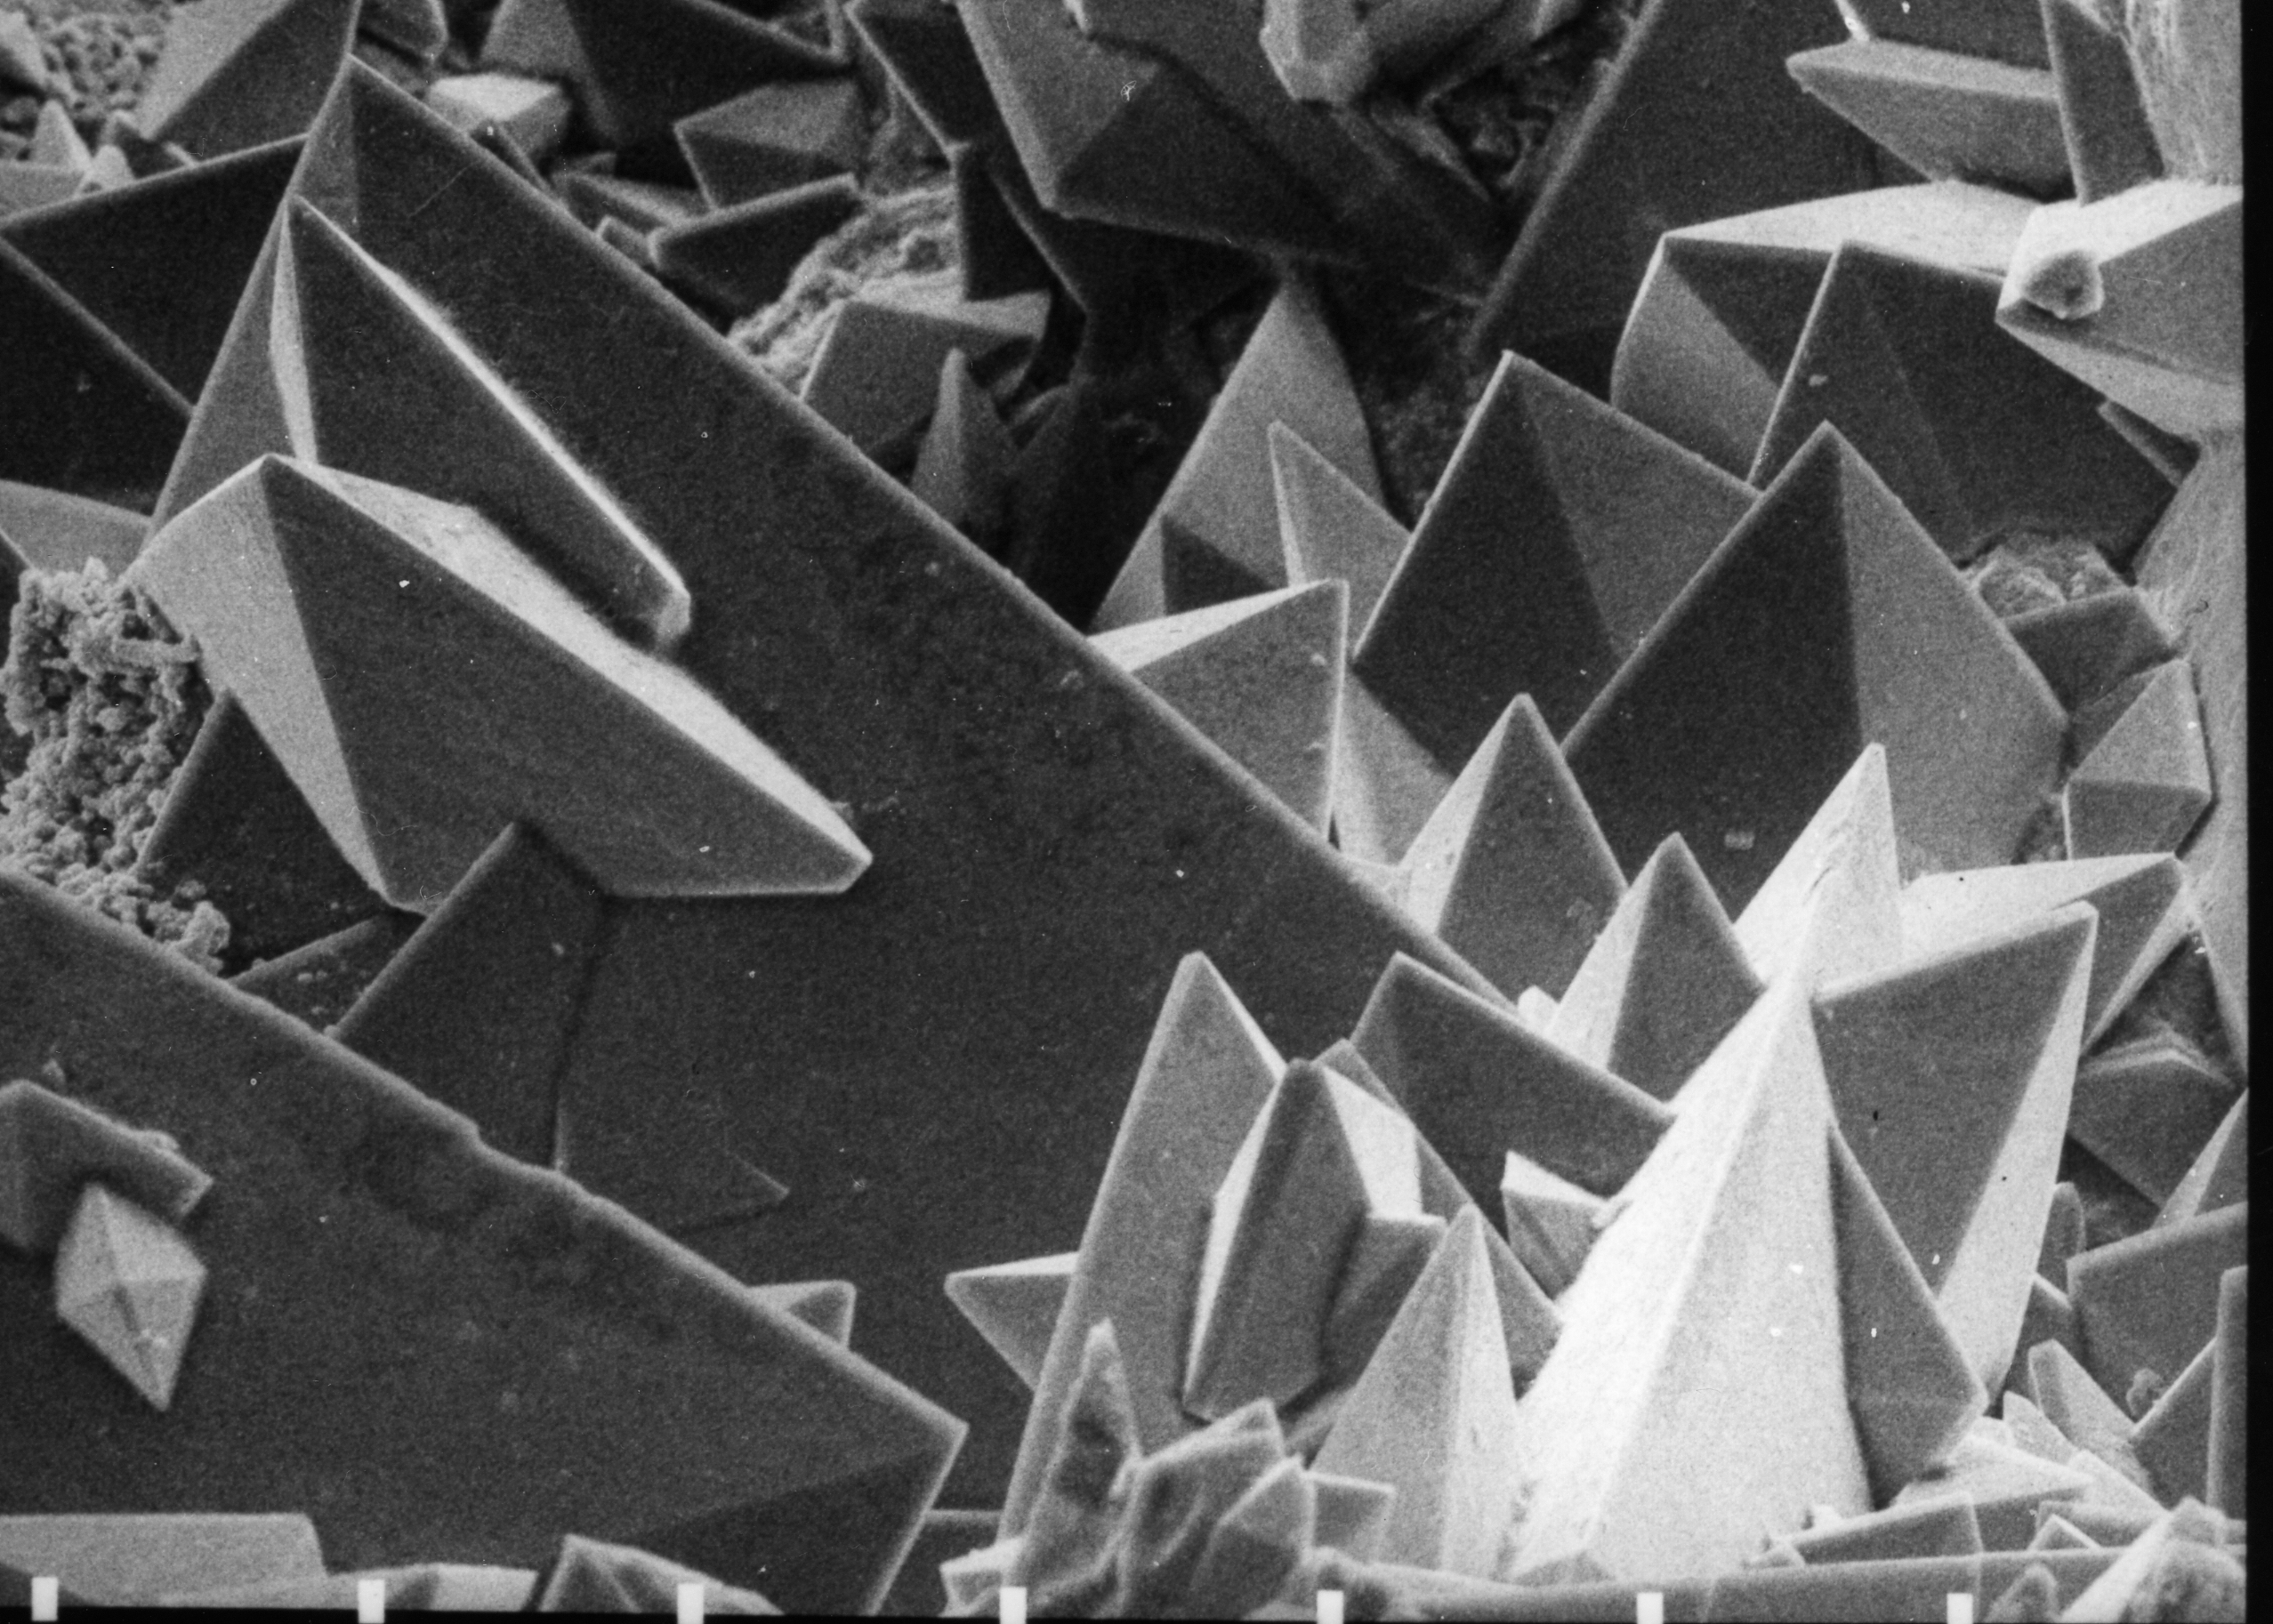 Calcium oxalate dihydrate crystals under Scanning Electron Micrograph (SEM) taken at 30 KV. Source: Wikimedia commons[23]